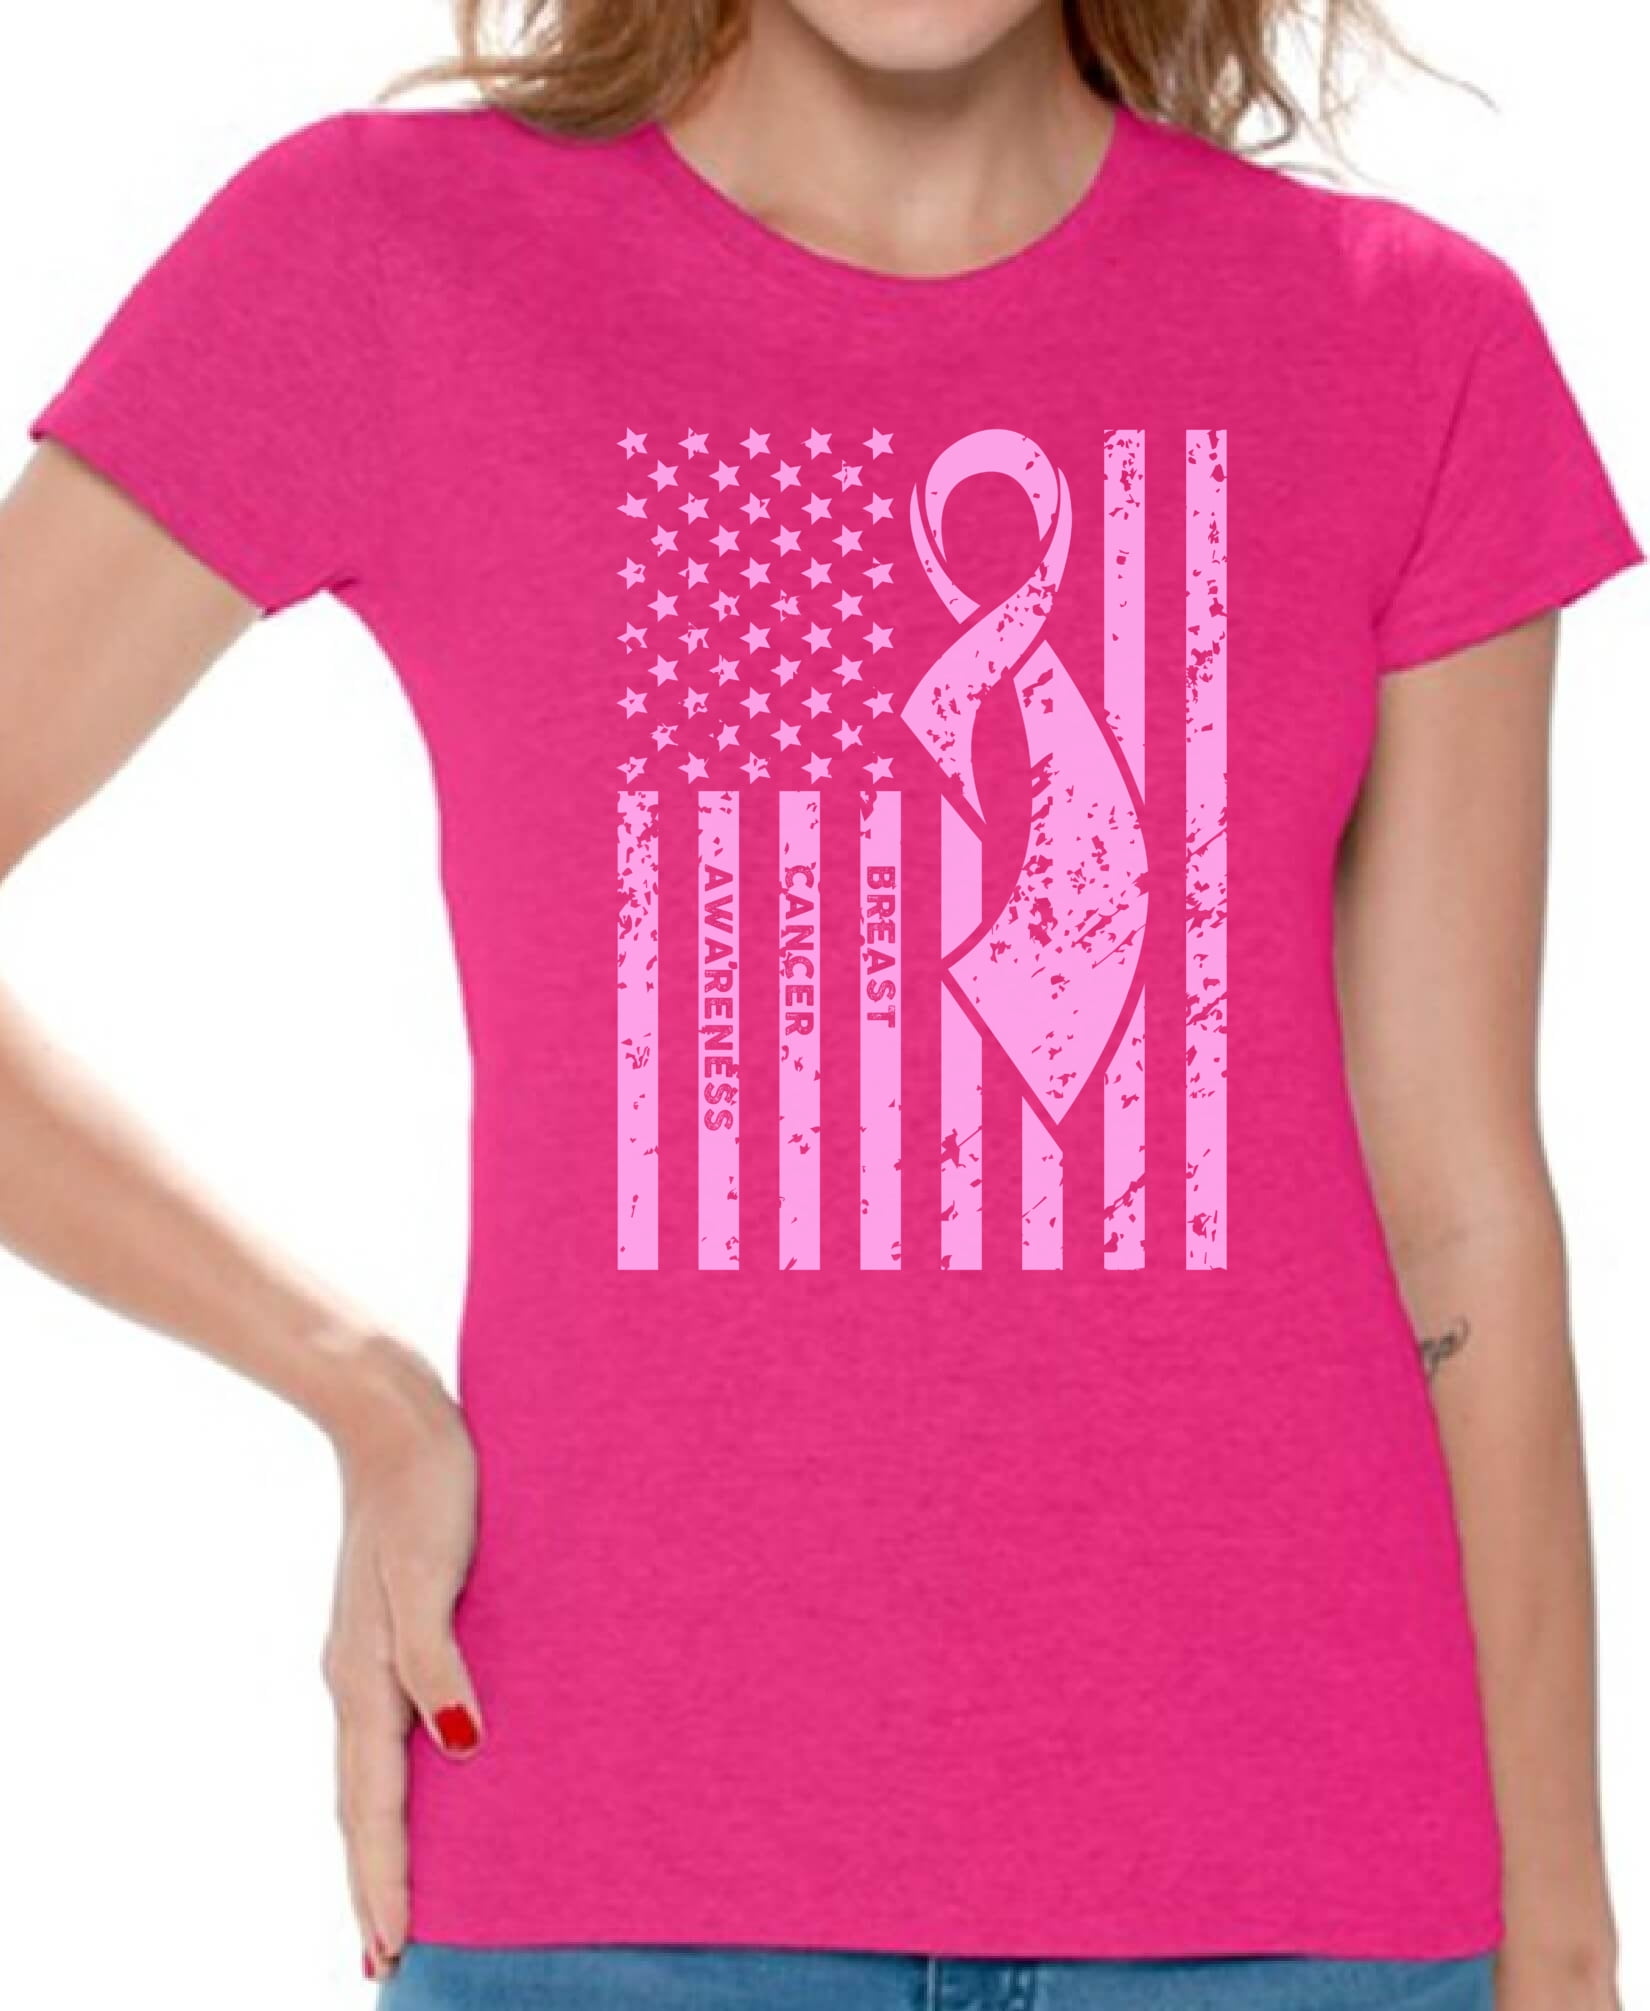 Breast Cancer Awareness Shirts Breast Cancer Shirts for Women